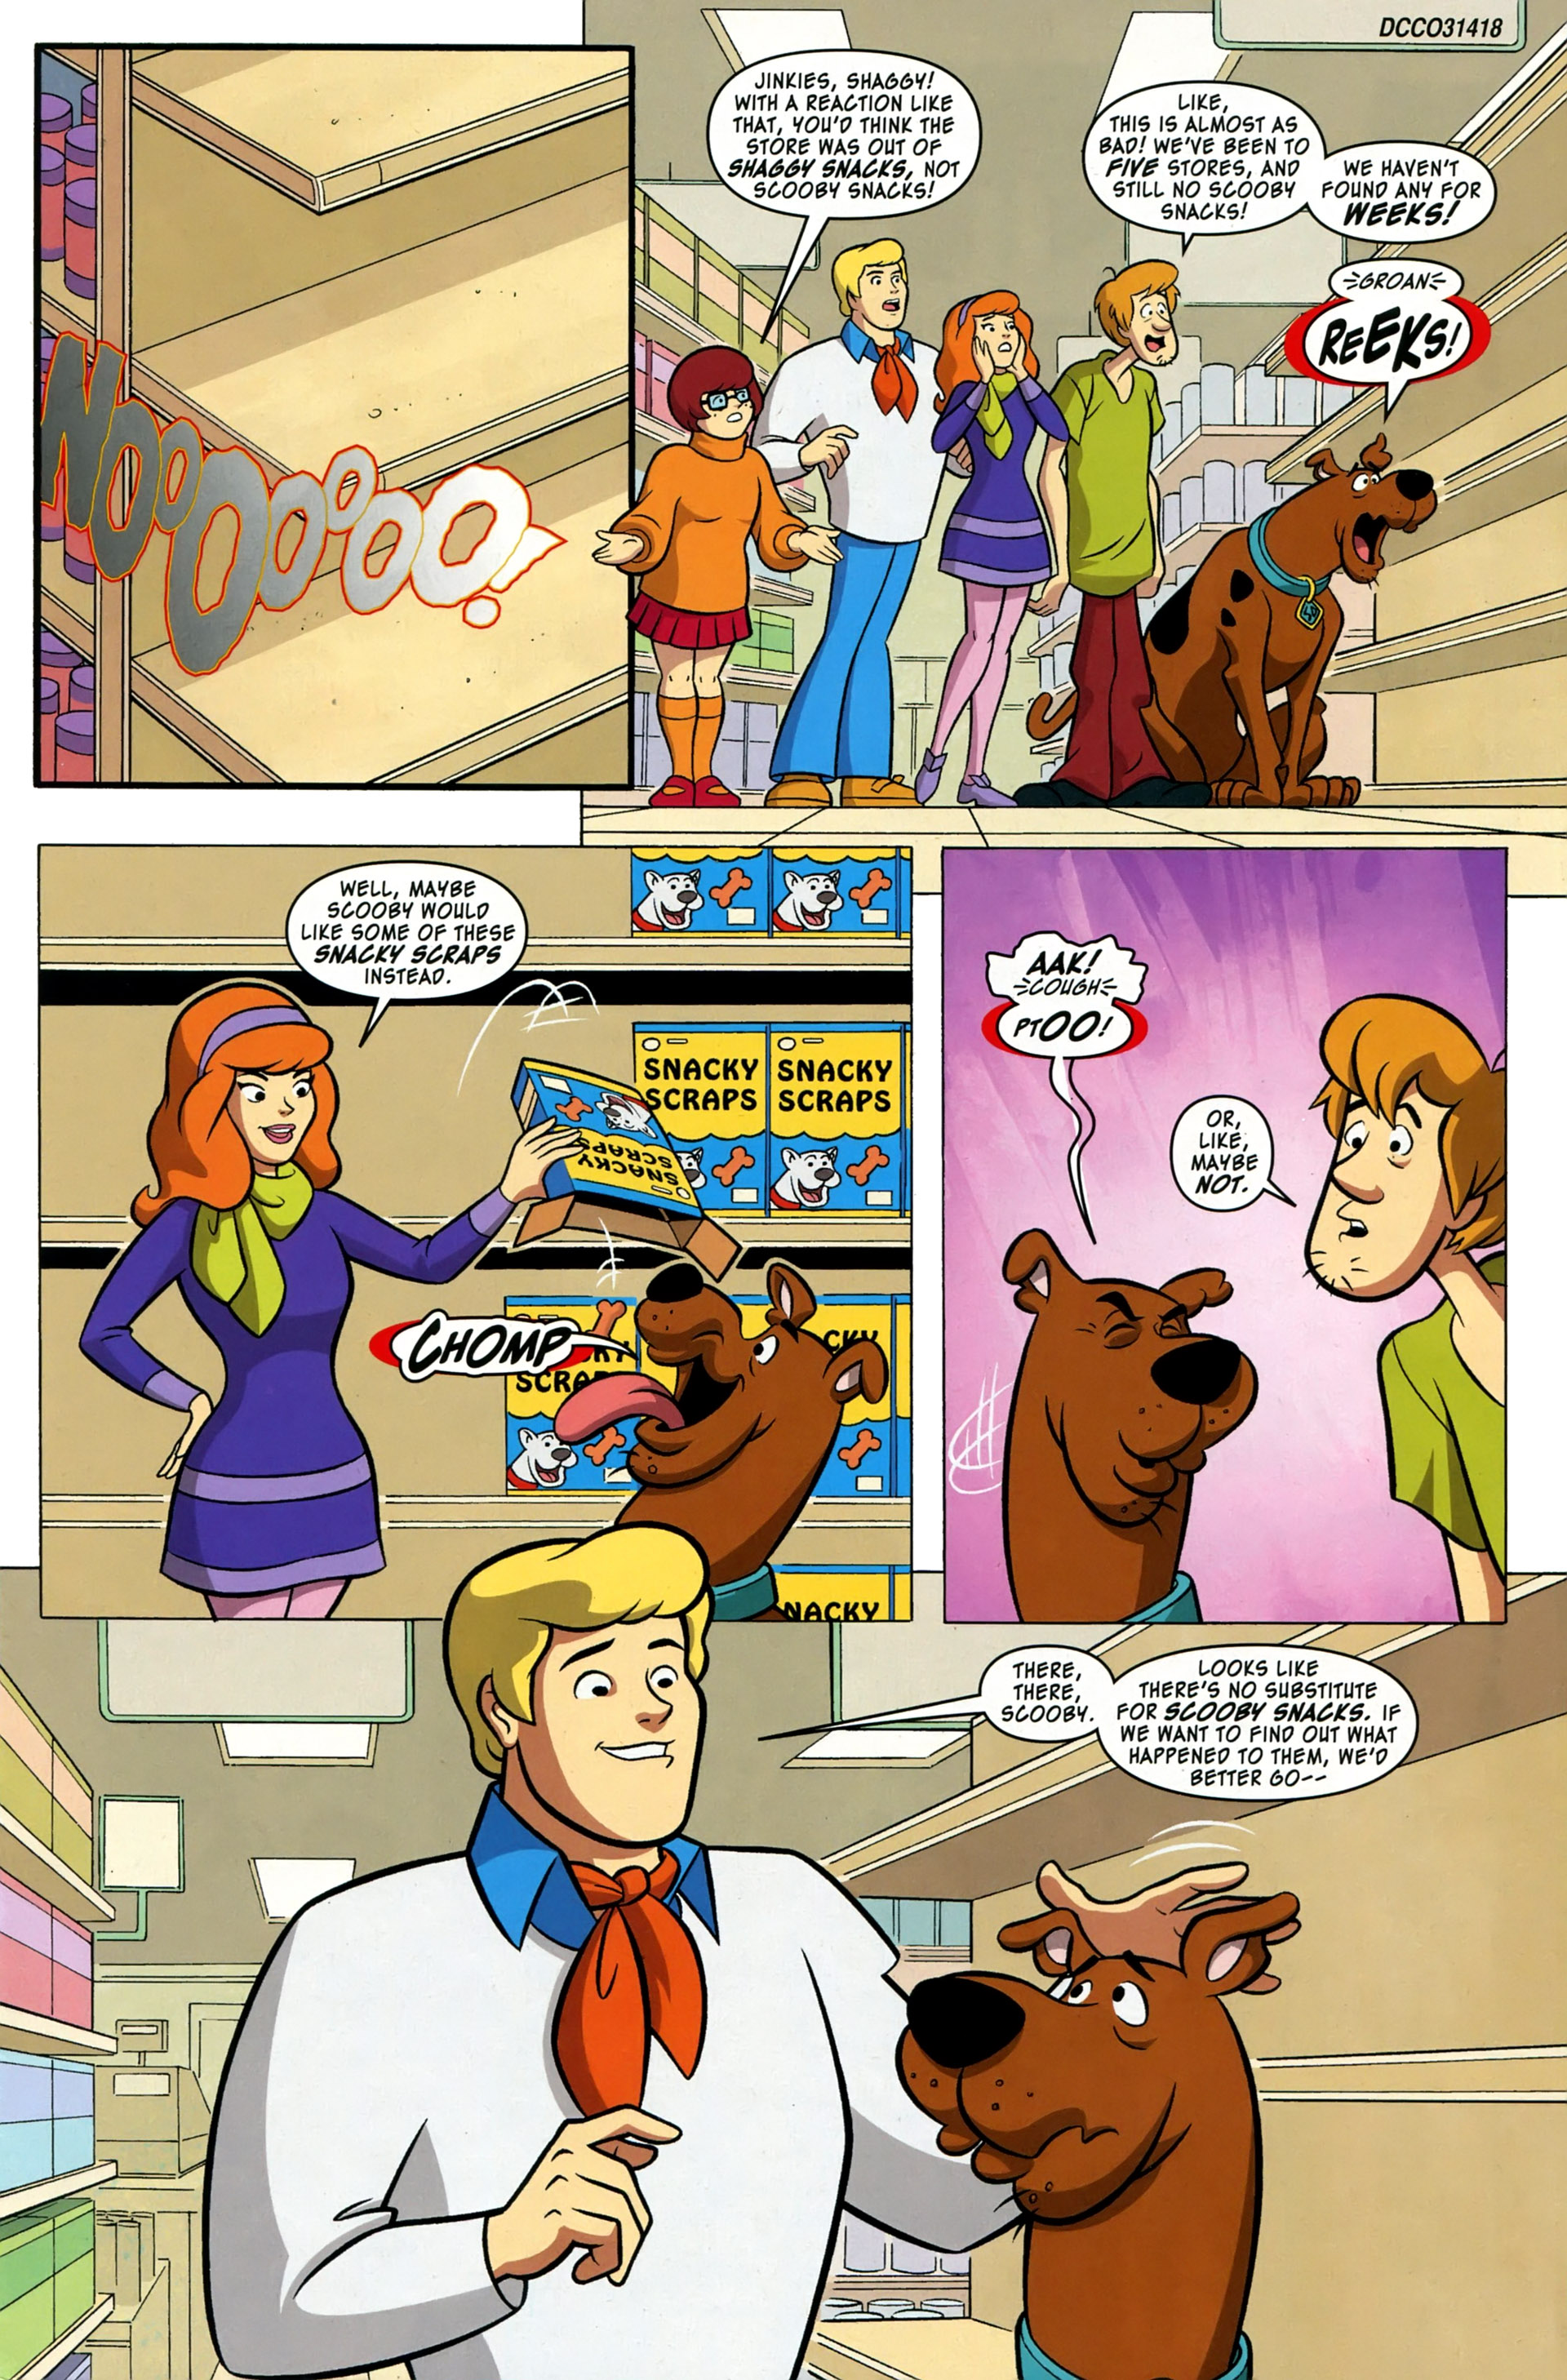 Read online Scooby-Doo: Where Are You? comic -  Issue #37 - 3